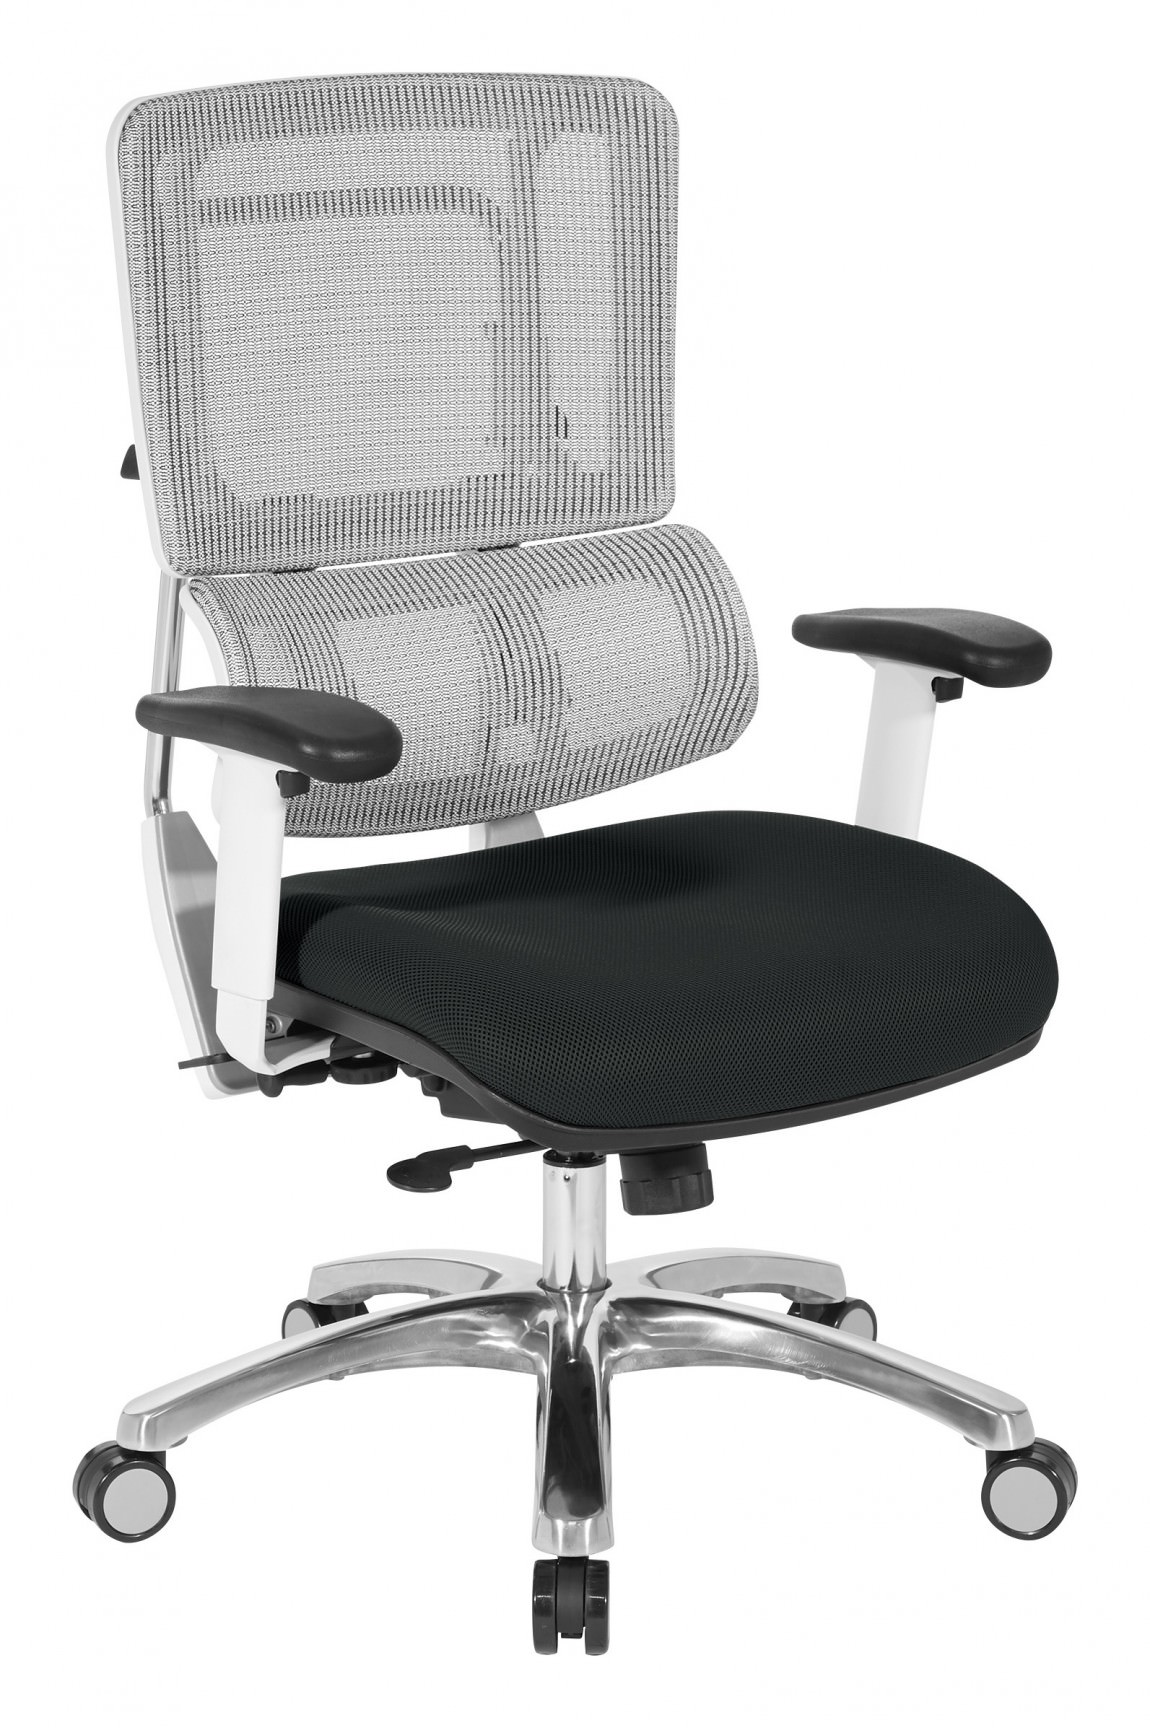 25801 Ergonomic Task Chair With Lumbar Support 2 